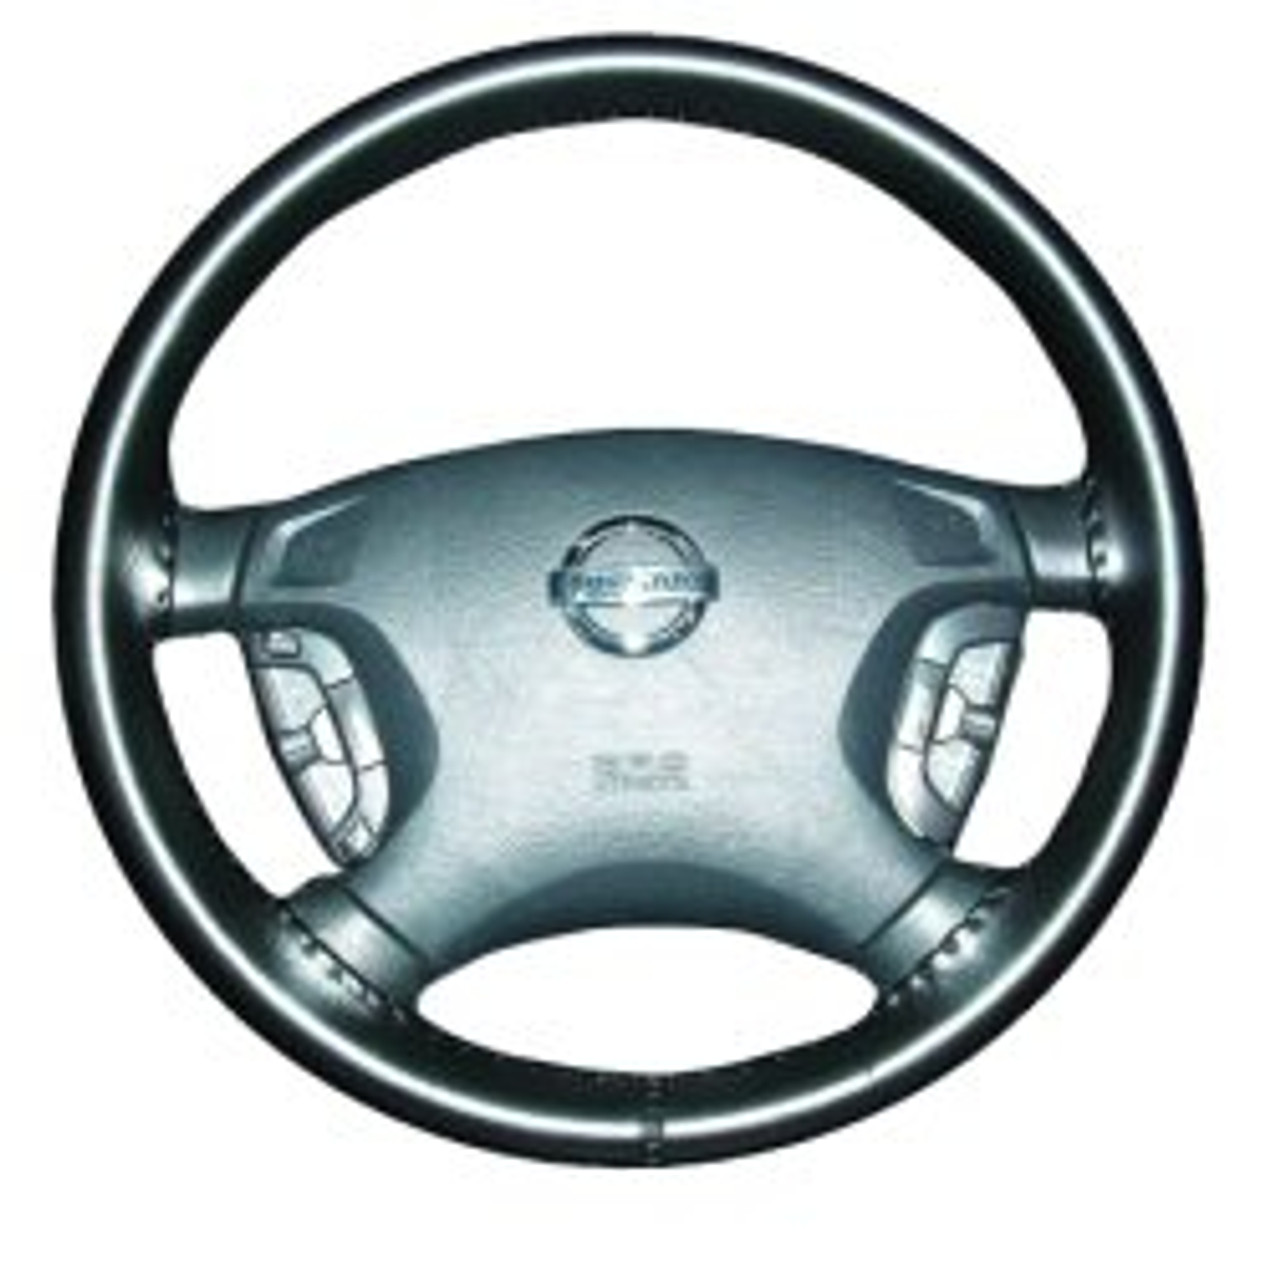 Details about   MEWANT PU Leather Car Steering Wheel Cover for Nissan Altima Maxima Quest Murano